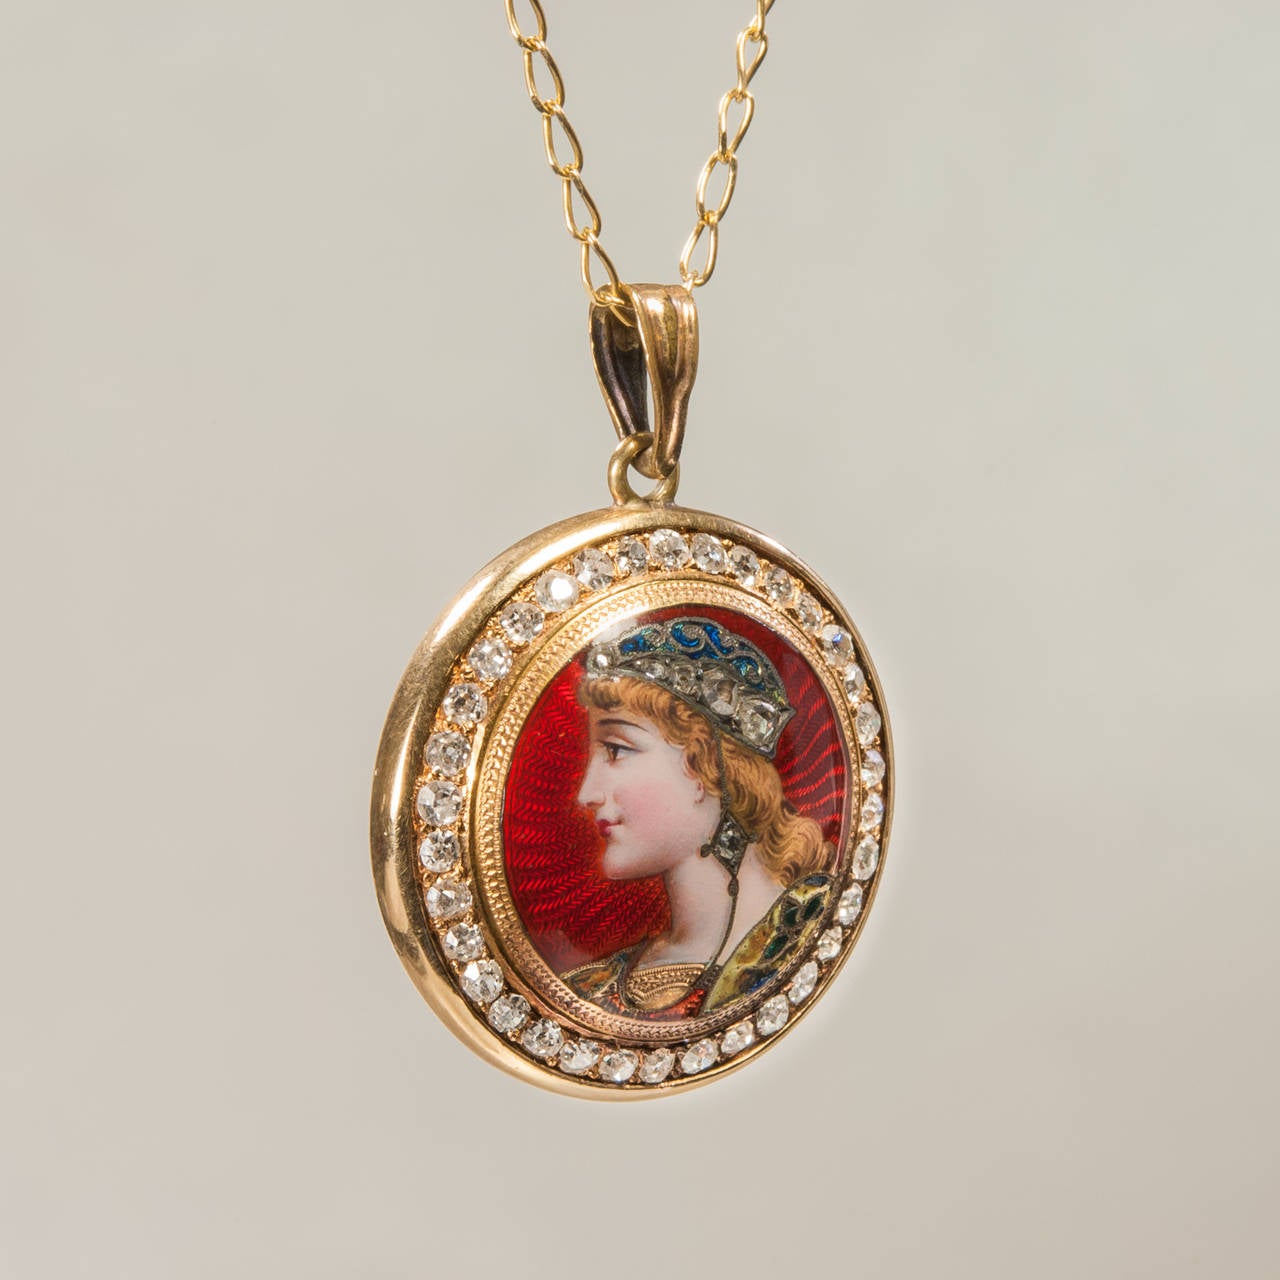 This mint condition Swiss Art Nouveau pendant from the early 1900s is as rare as they come.  A young beauty in profile, resplendent in her rose and single cut diamond encrusted headdress and finely detailed enamel bodice, is the blushing centerpiece